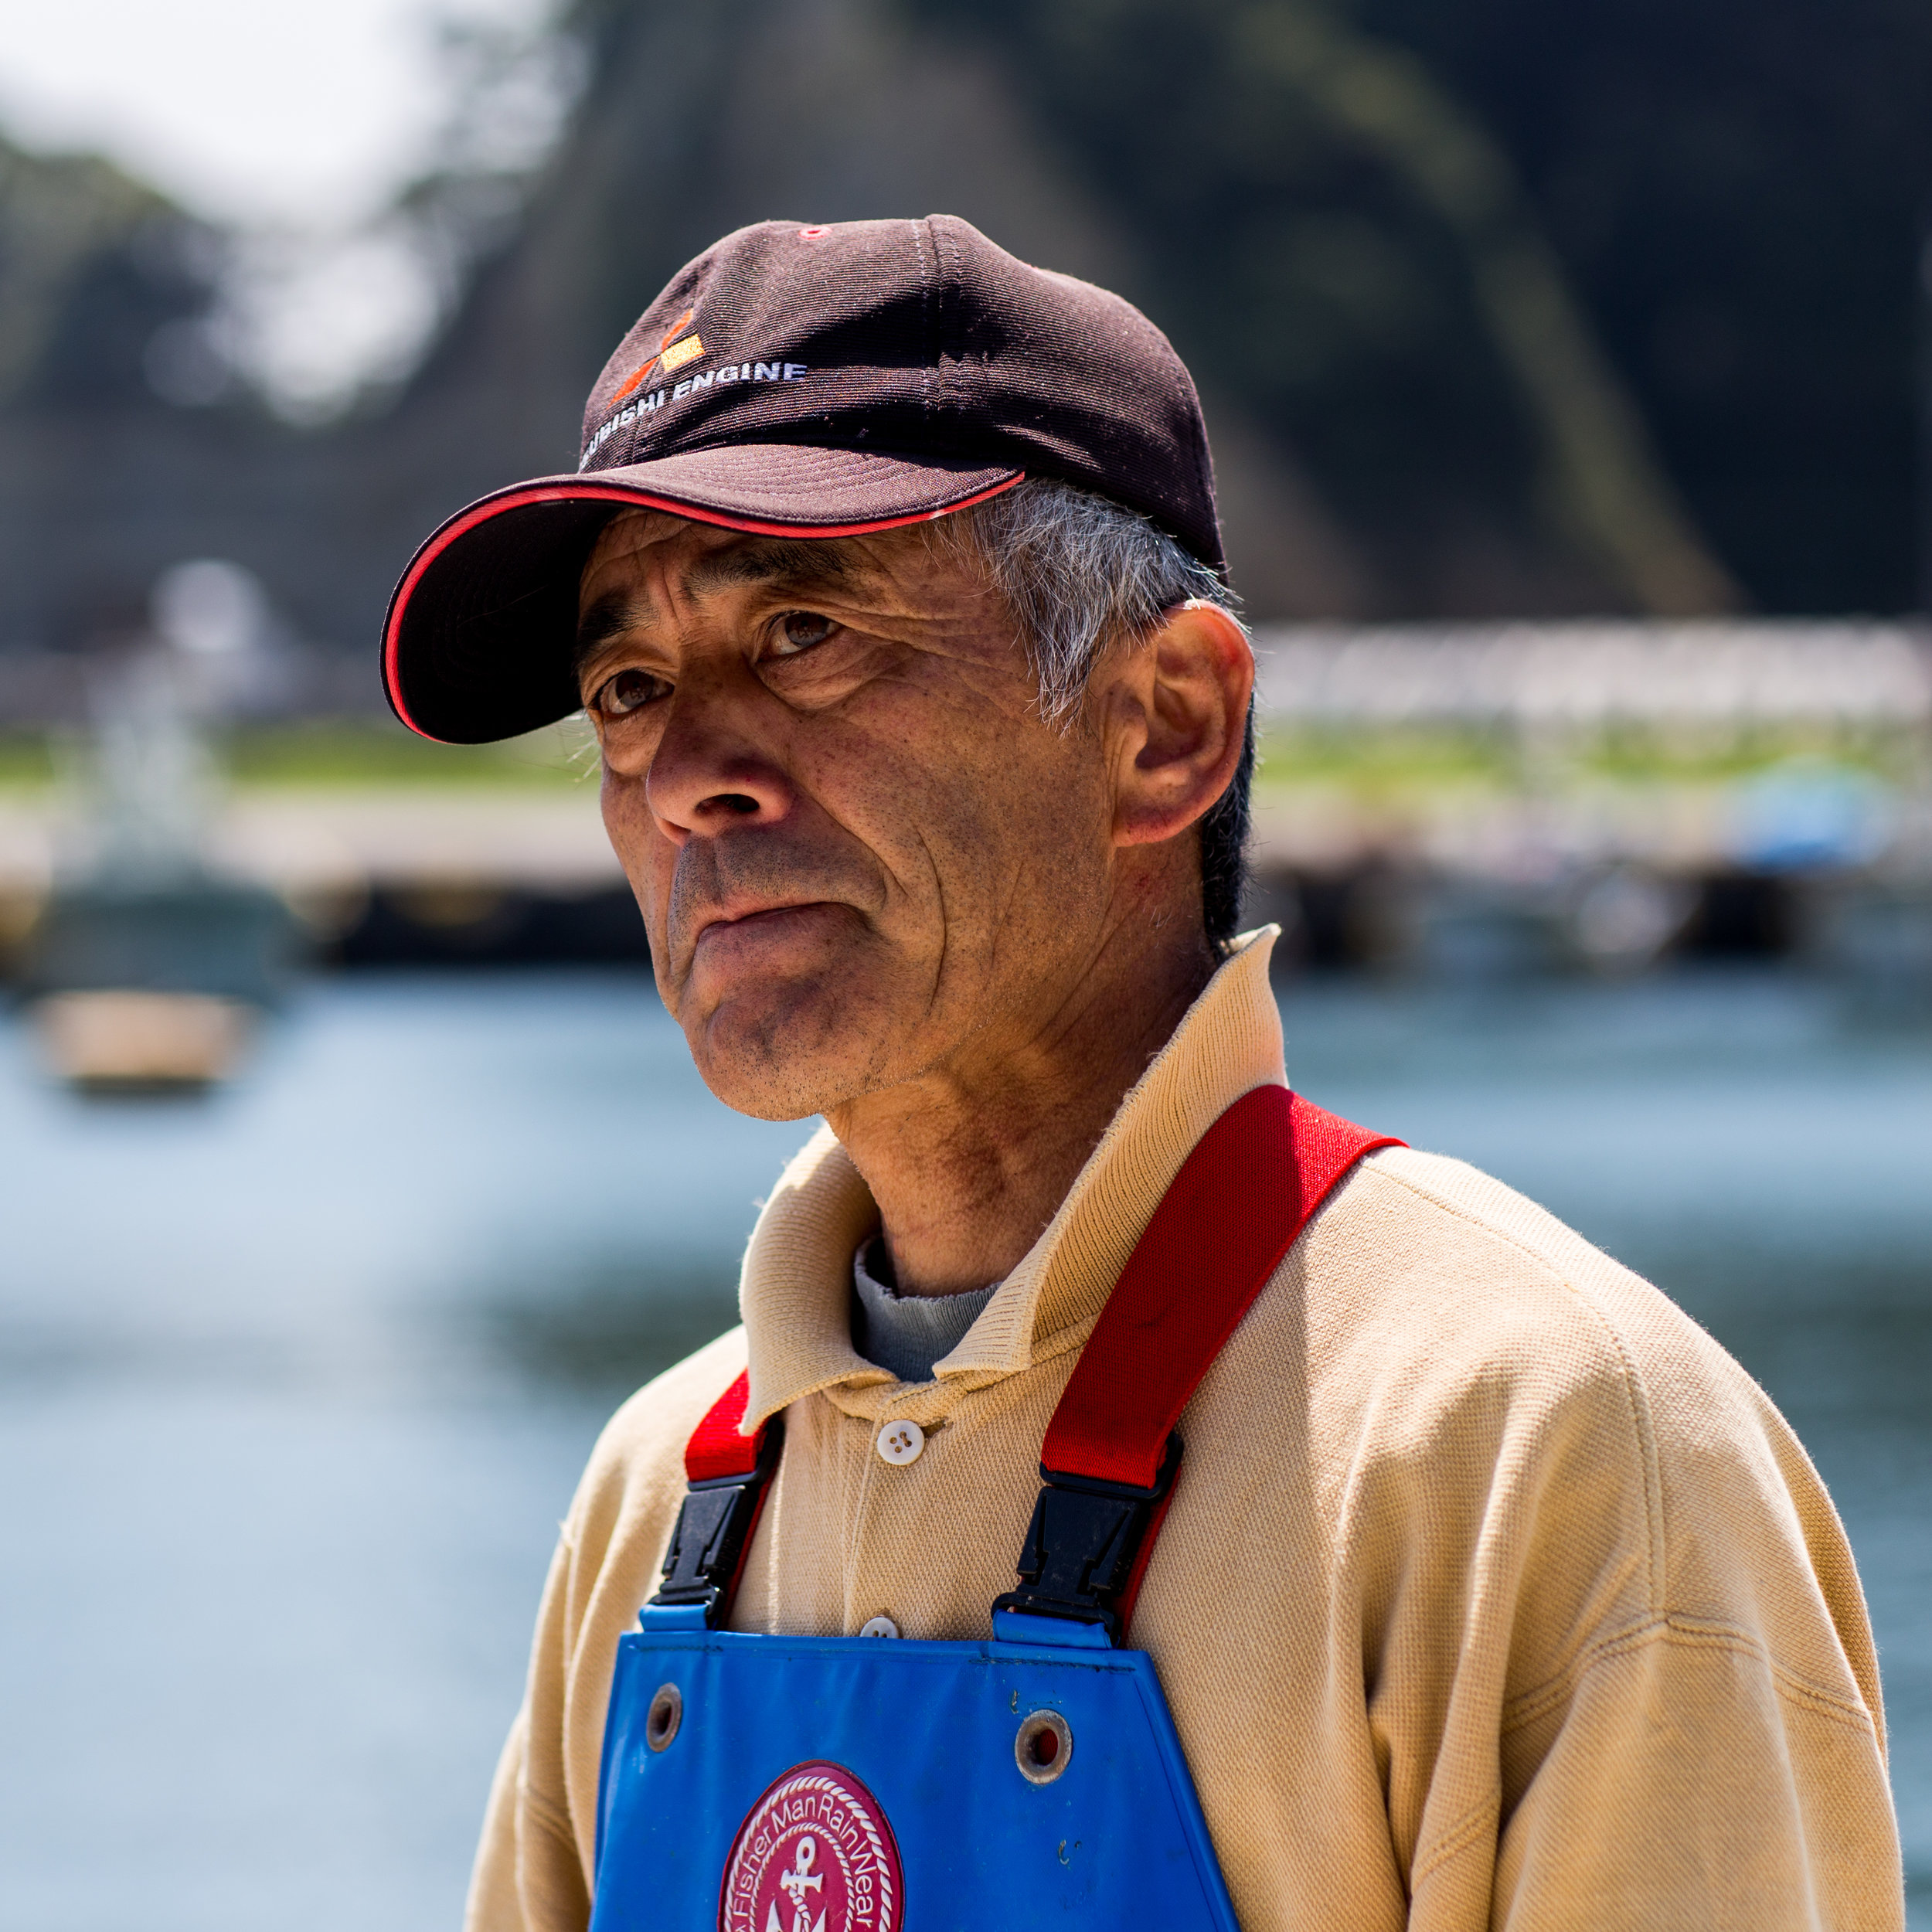  Each week, fishermen in Nakasogyoko, a small port on the southern border of Fukushima Prefecture, receive a stipend to catch fish for data. 